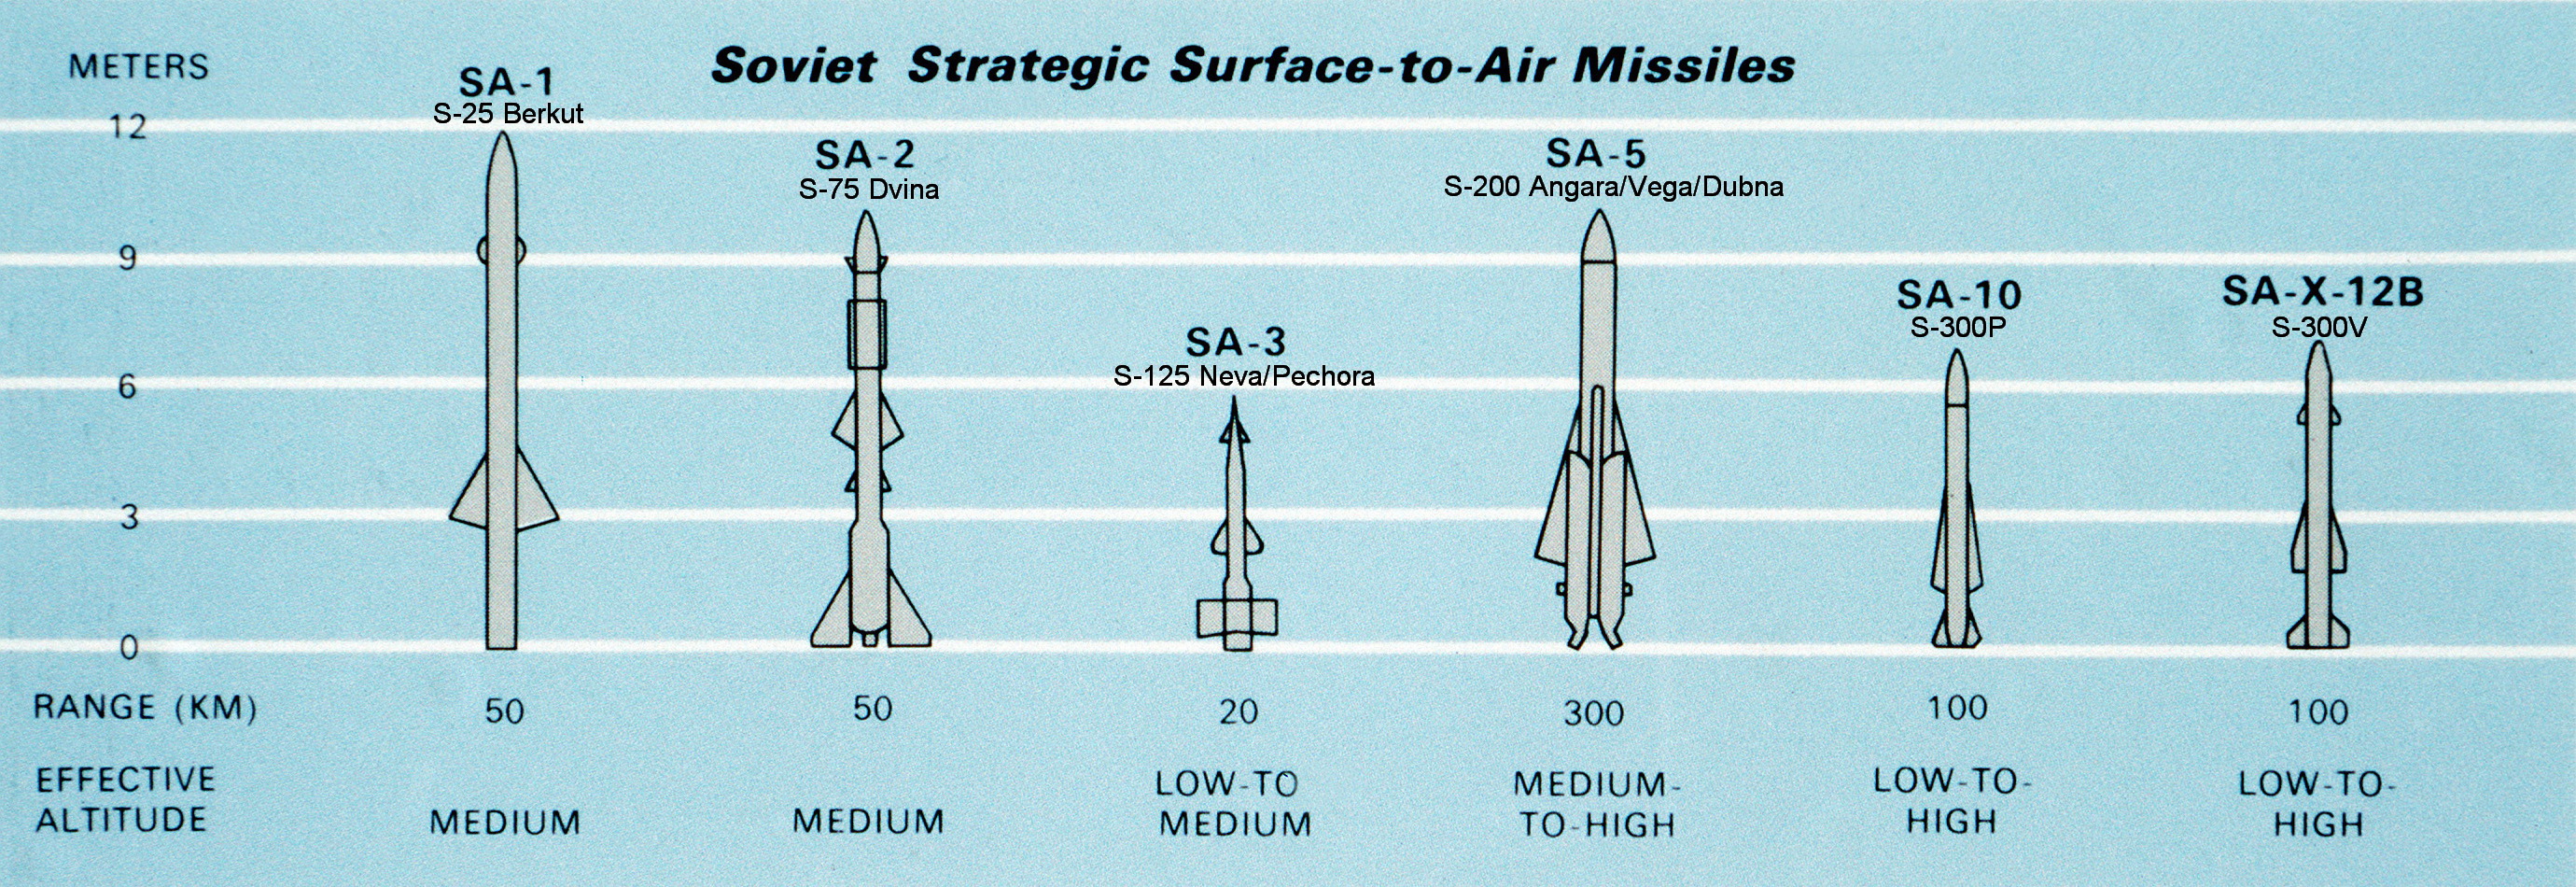 Soviet_surface-to-air_missiles.JPEG